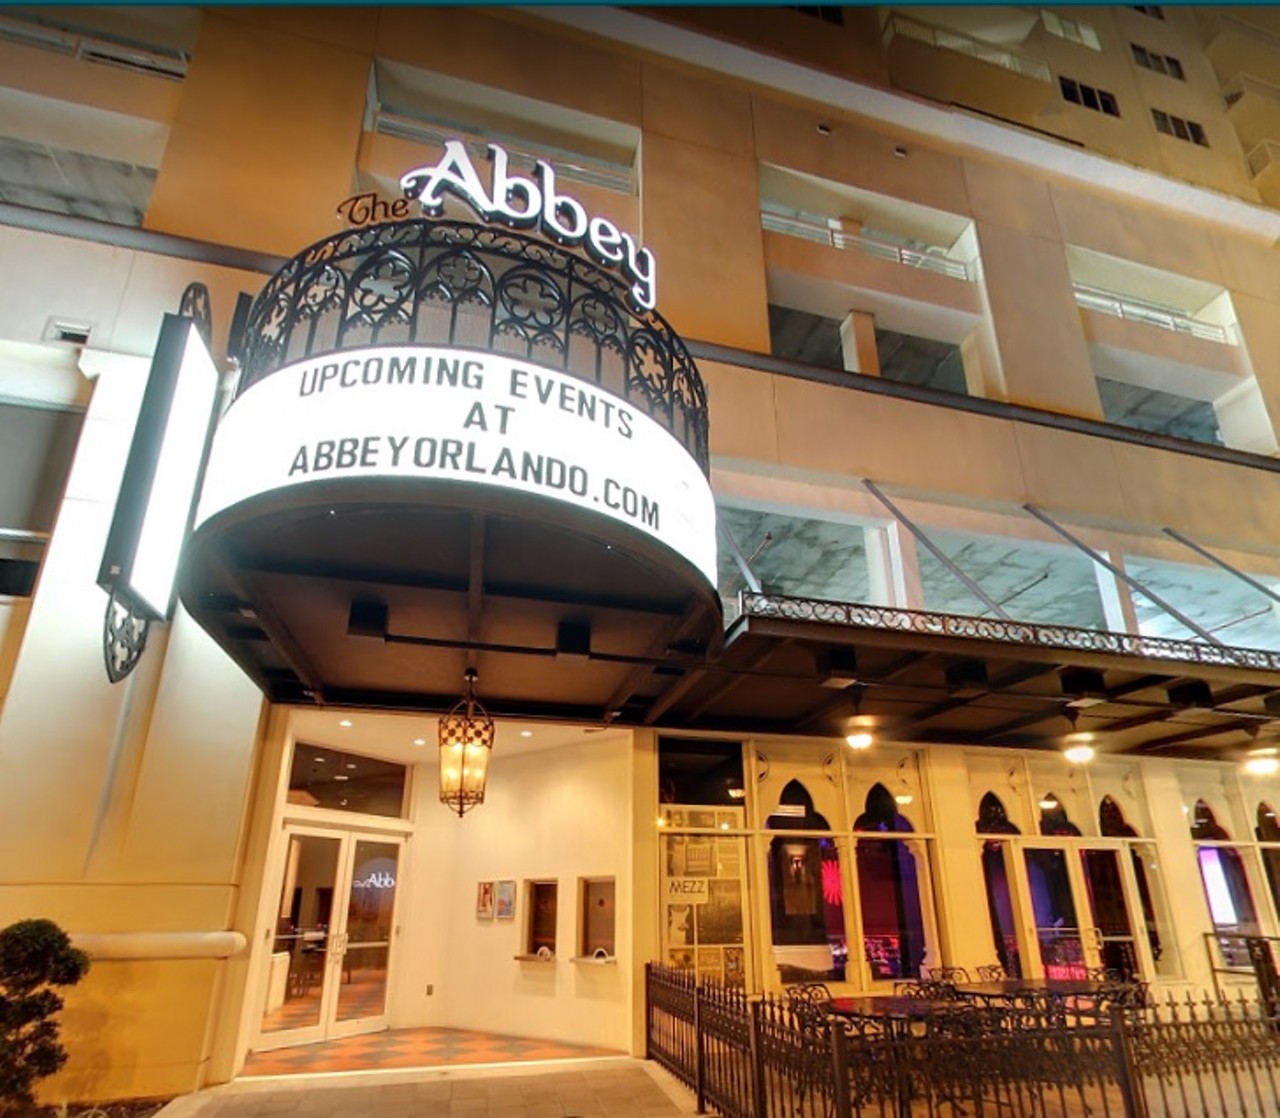 The Abbey: &#147;Sweets & Songs&#148; 
100 S. Eola Drive, Suite 100
If you enjoy sweets, drinks, and decadent music, swing by the Abbey&#146;s &#147;Sweet & Songs&#148; event on Feb. 13. Enjoy luscious snacks while the Celebration Theatre Co. serenades you at this Valentine &#147;Carb&#148;-eret.
Photo via The Abbey/Google Maps